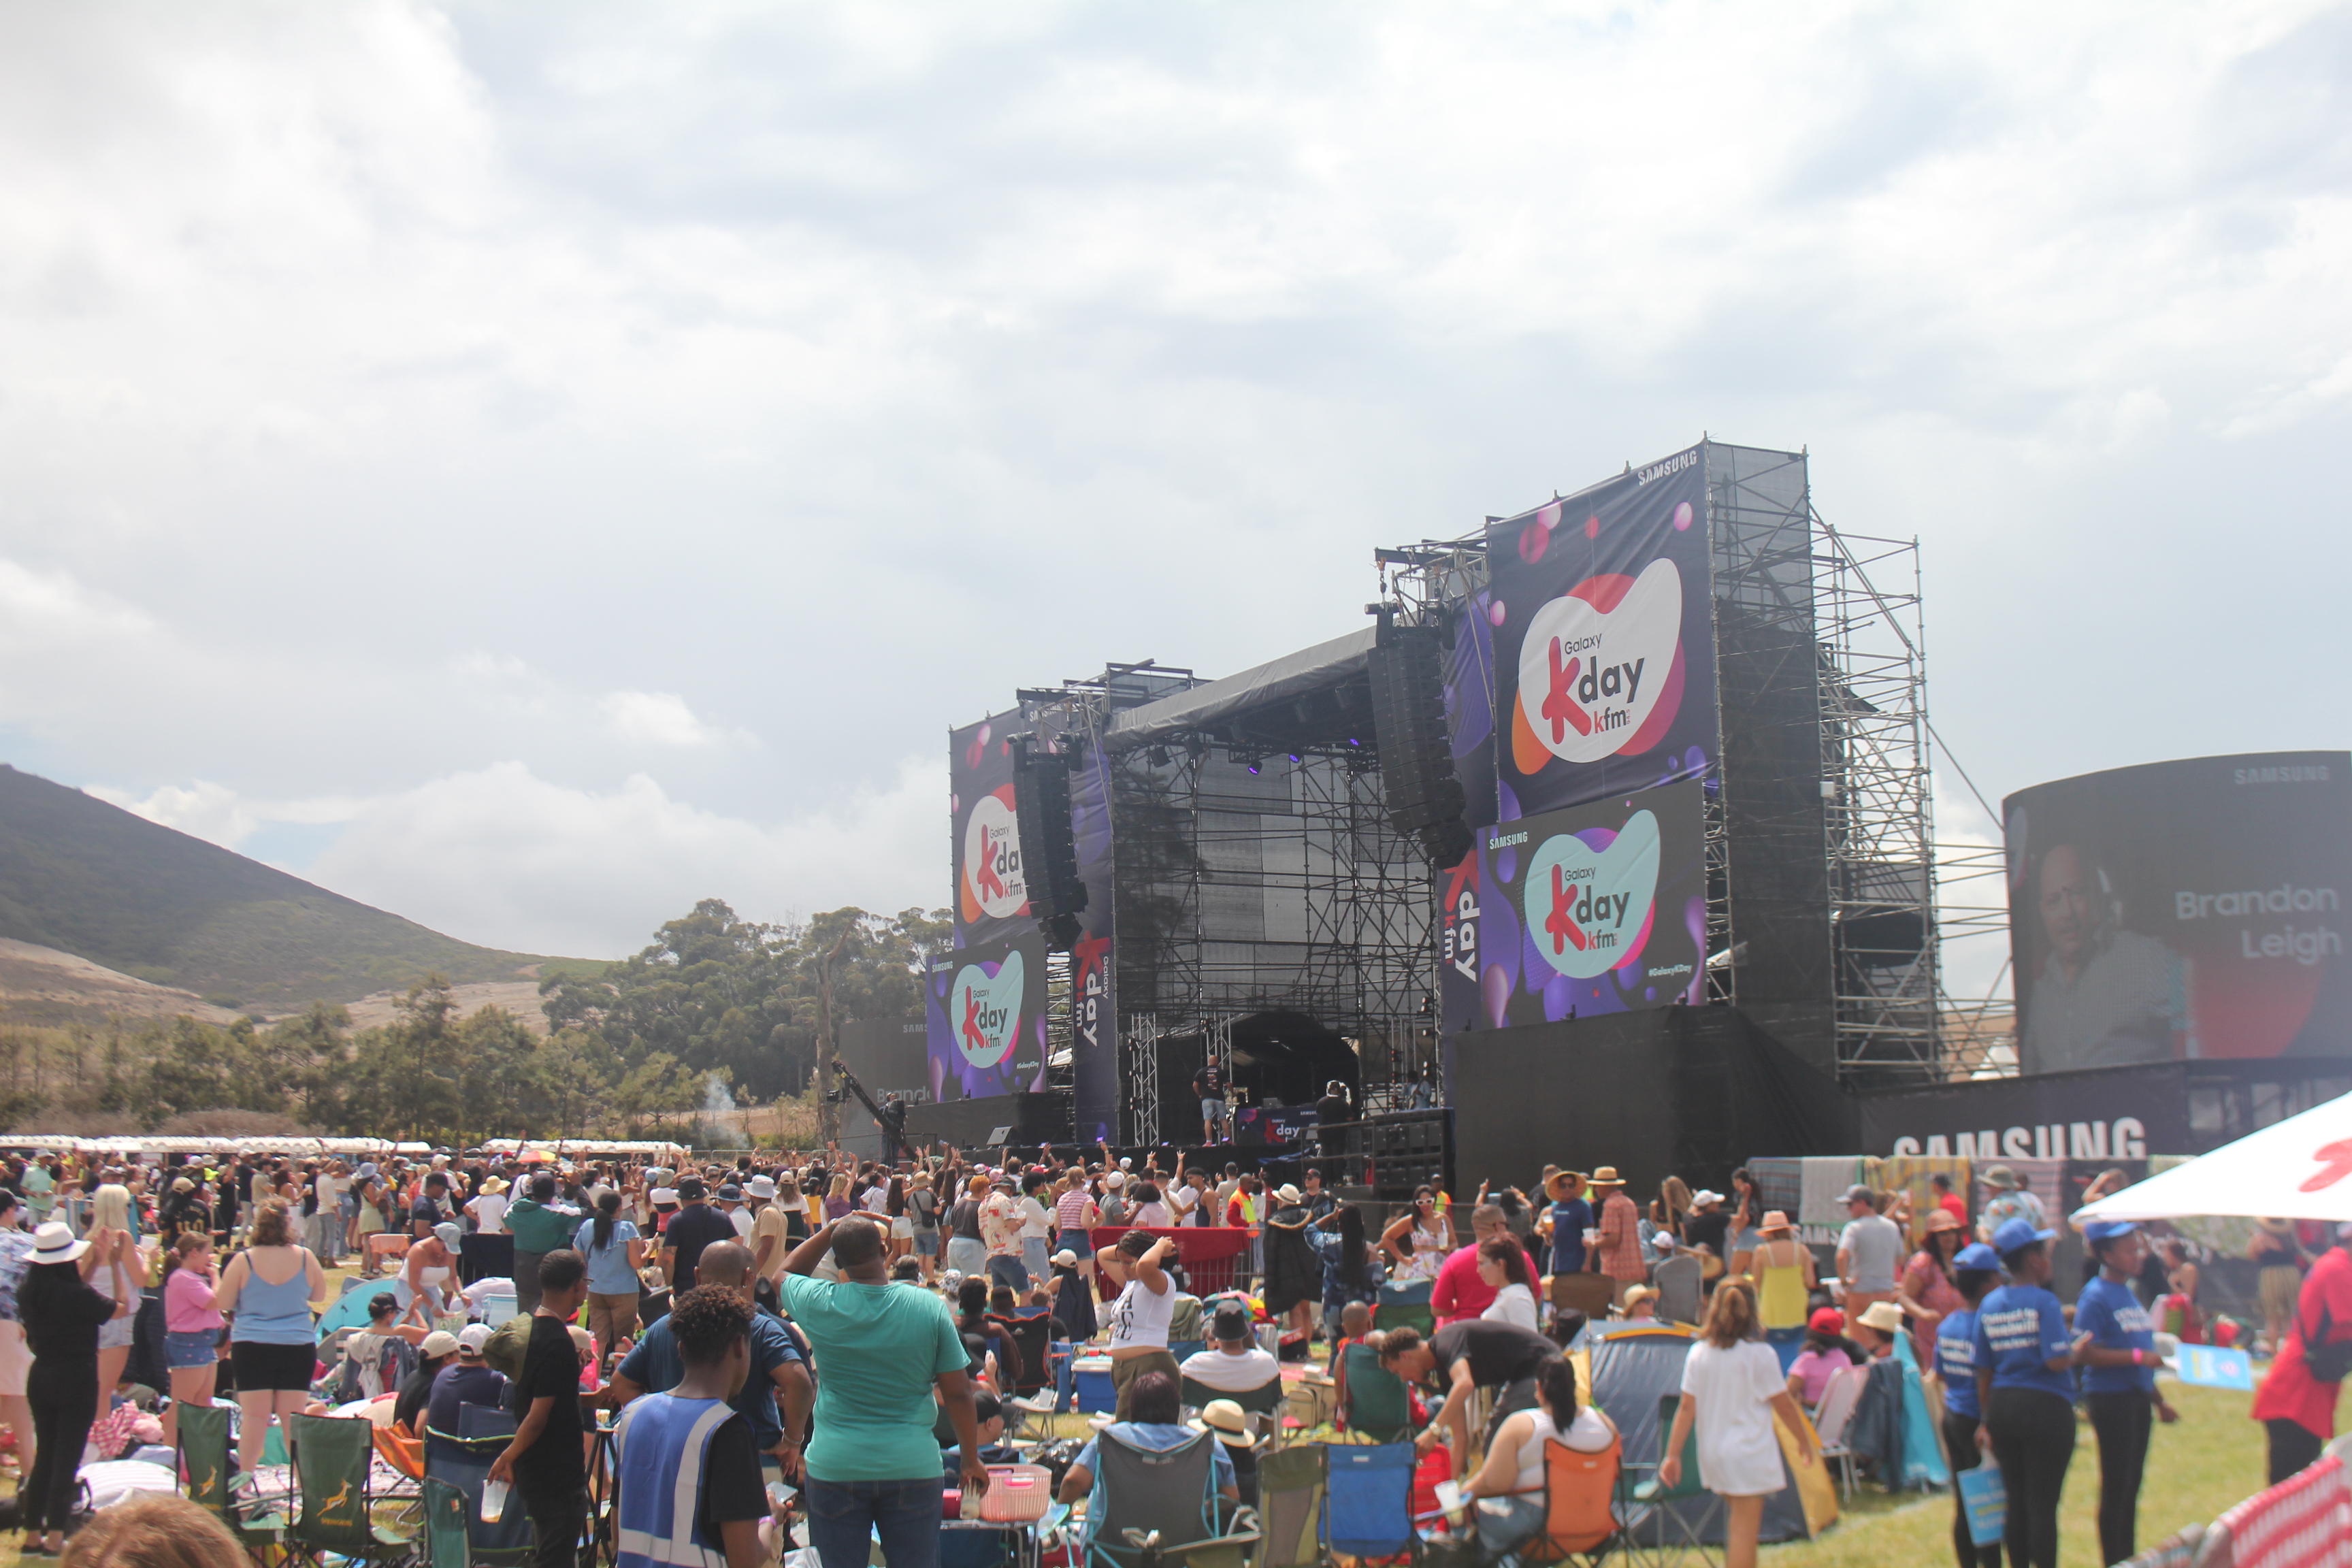 People showed up in force for the Galaxy KDay Festival. Image: An Wentzel